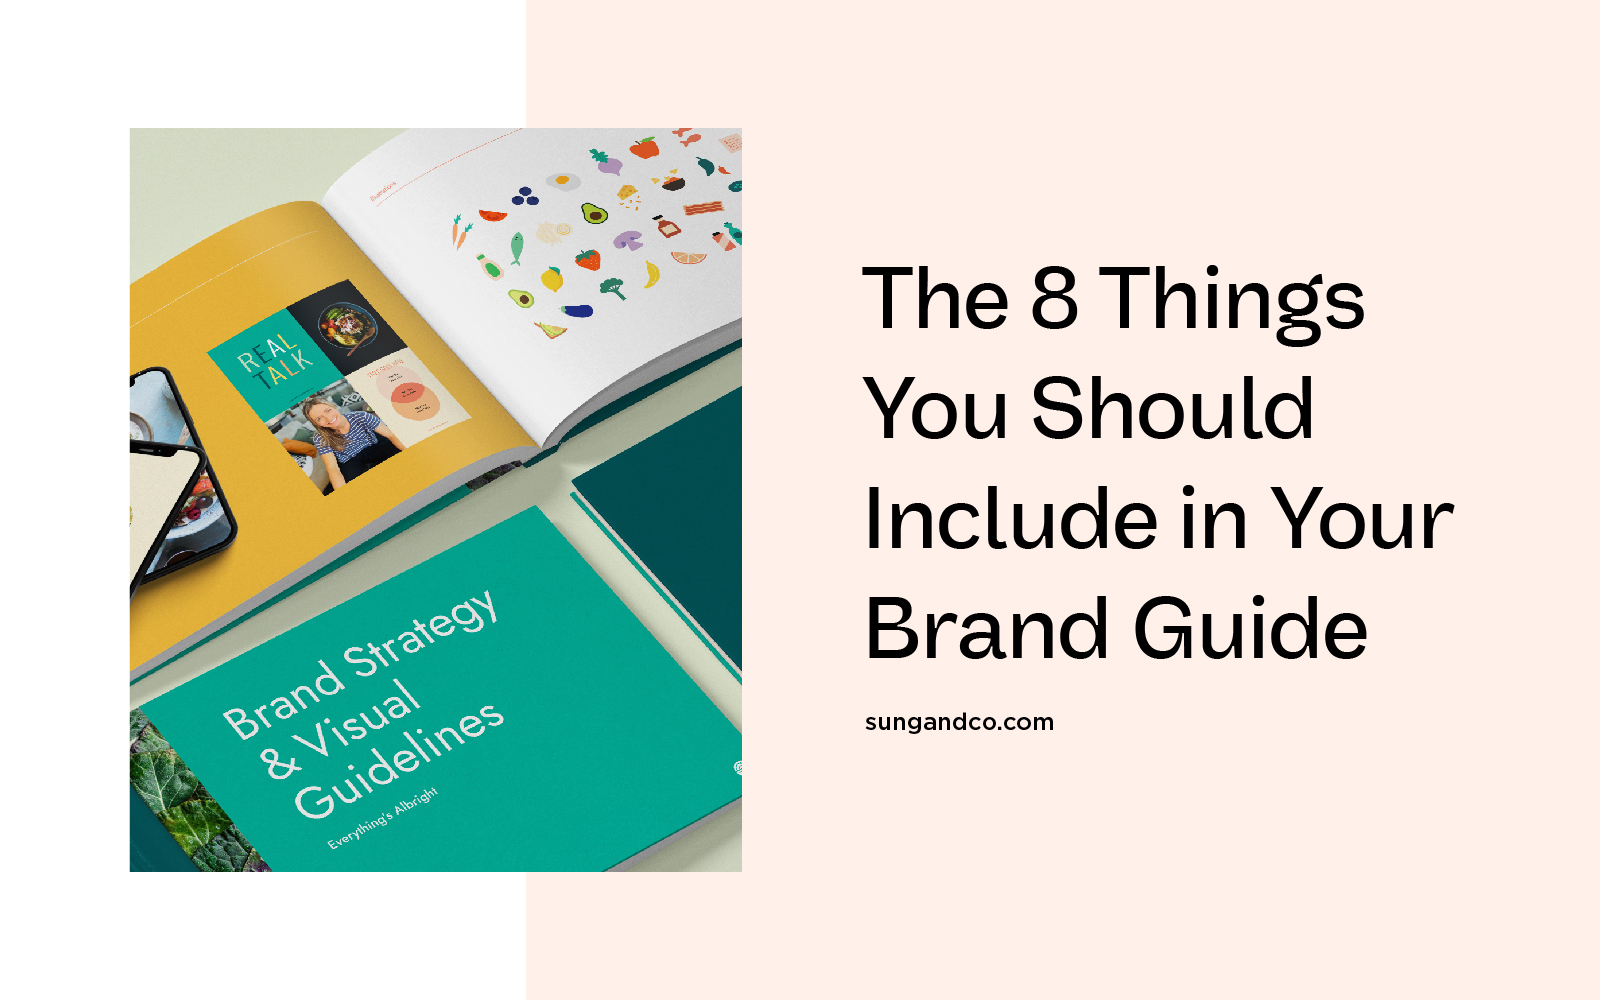 The 8 Things You Should Include in Your Brand Guide